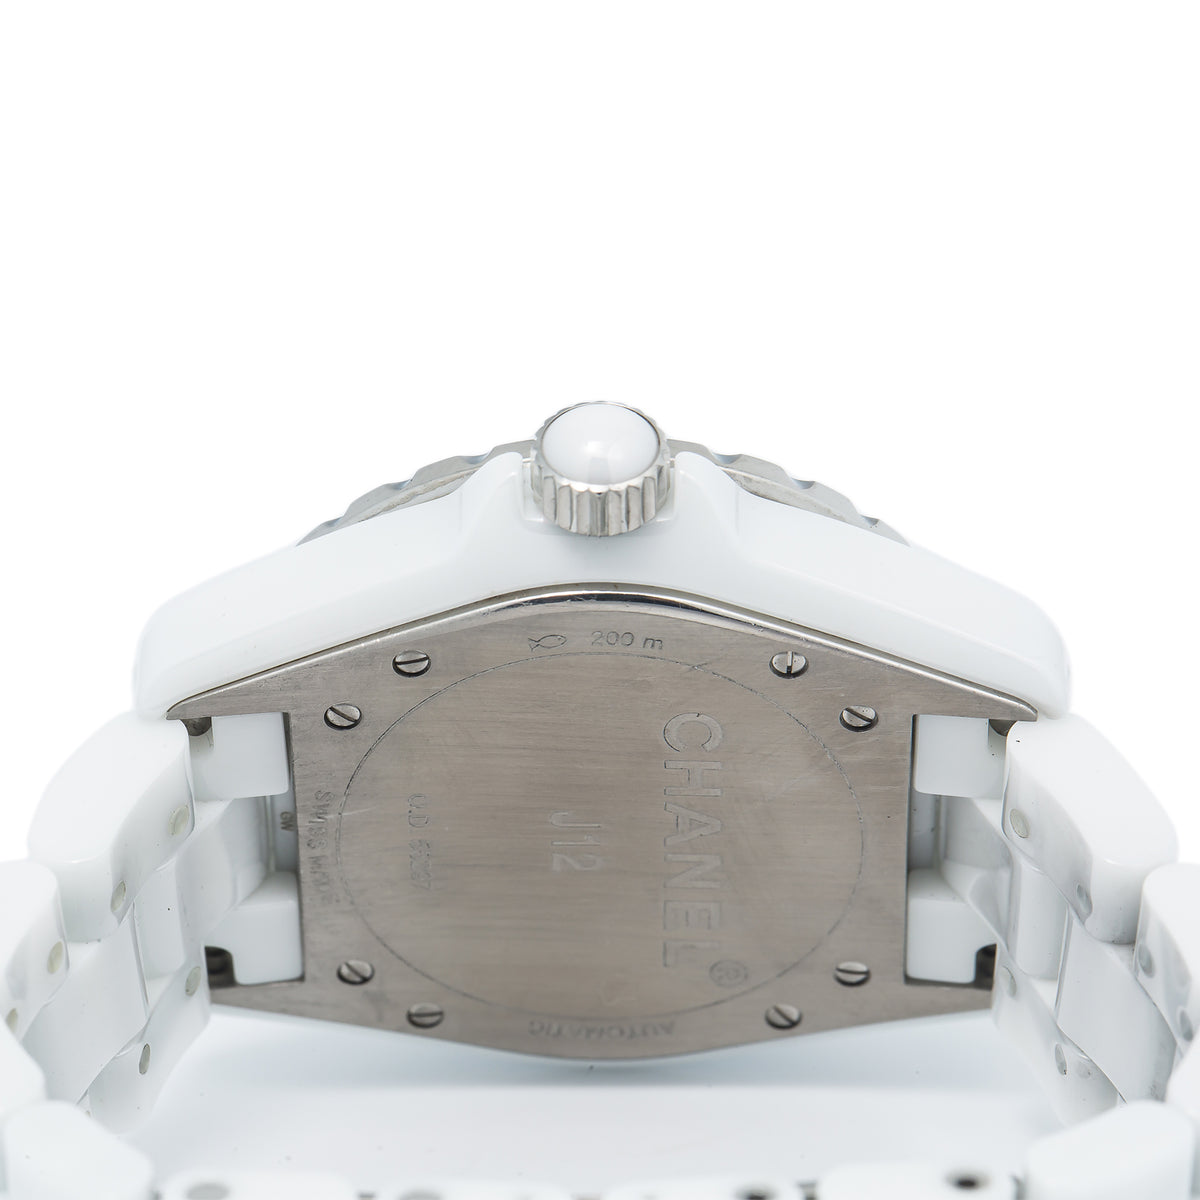 Chanel J12 H1629 White Ceramic Factory Diamond Date Ladie's Automatic Watch 38mm